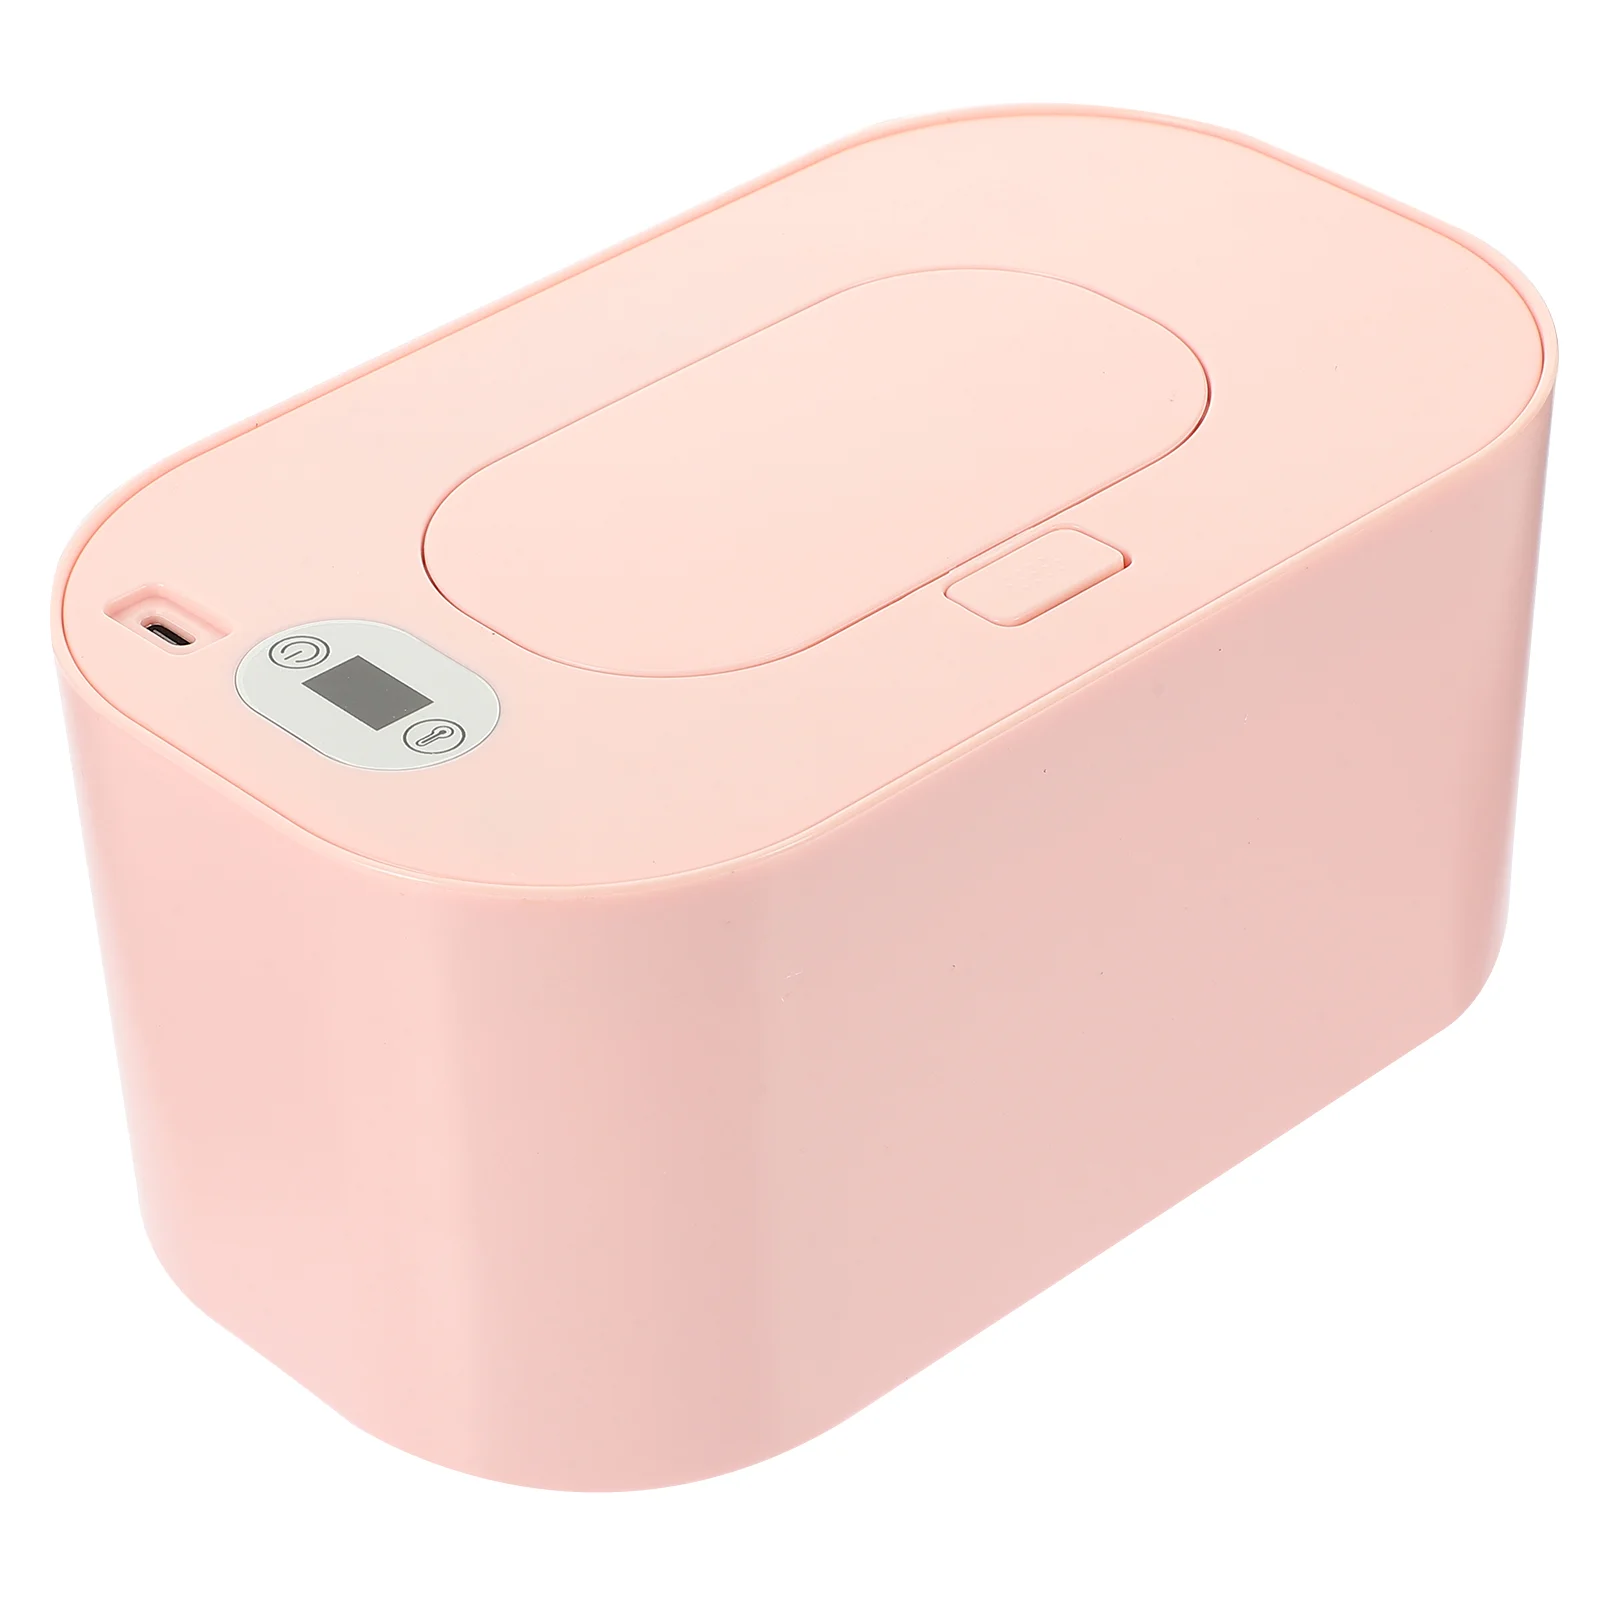 

Wet Wipe Warmer Thermostatic Tissue Machine Using USB Heater Baby Wipes Case Heating Warming Portable Heaters Box